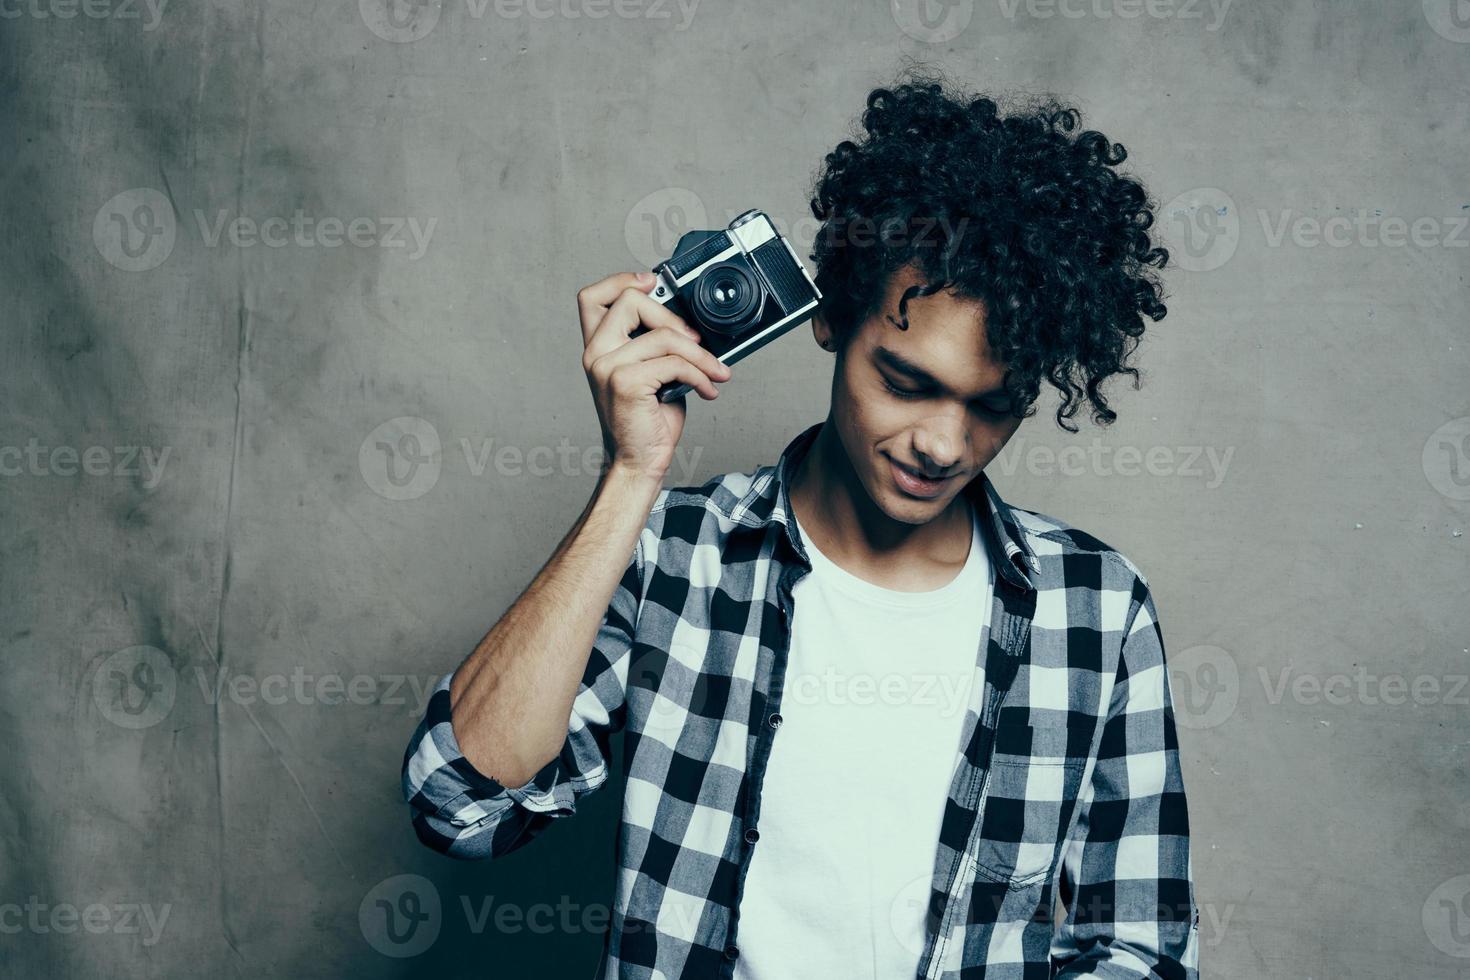 young man with a camera in hand and in a plaid t-shirt on a gray background indoors photographer photo